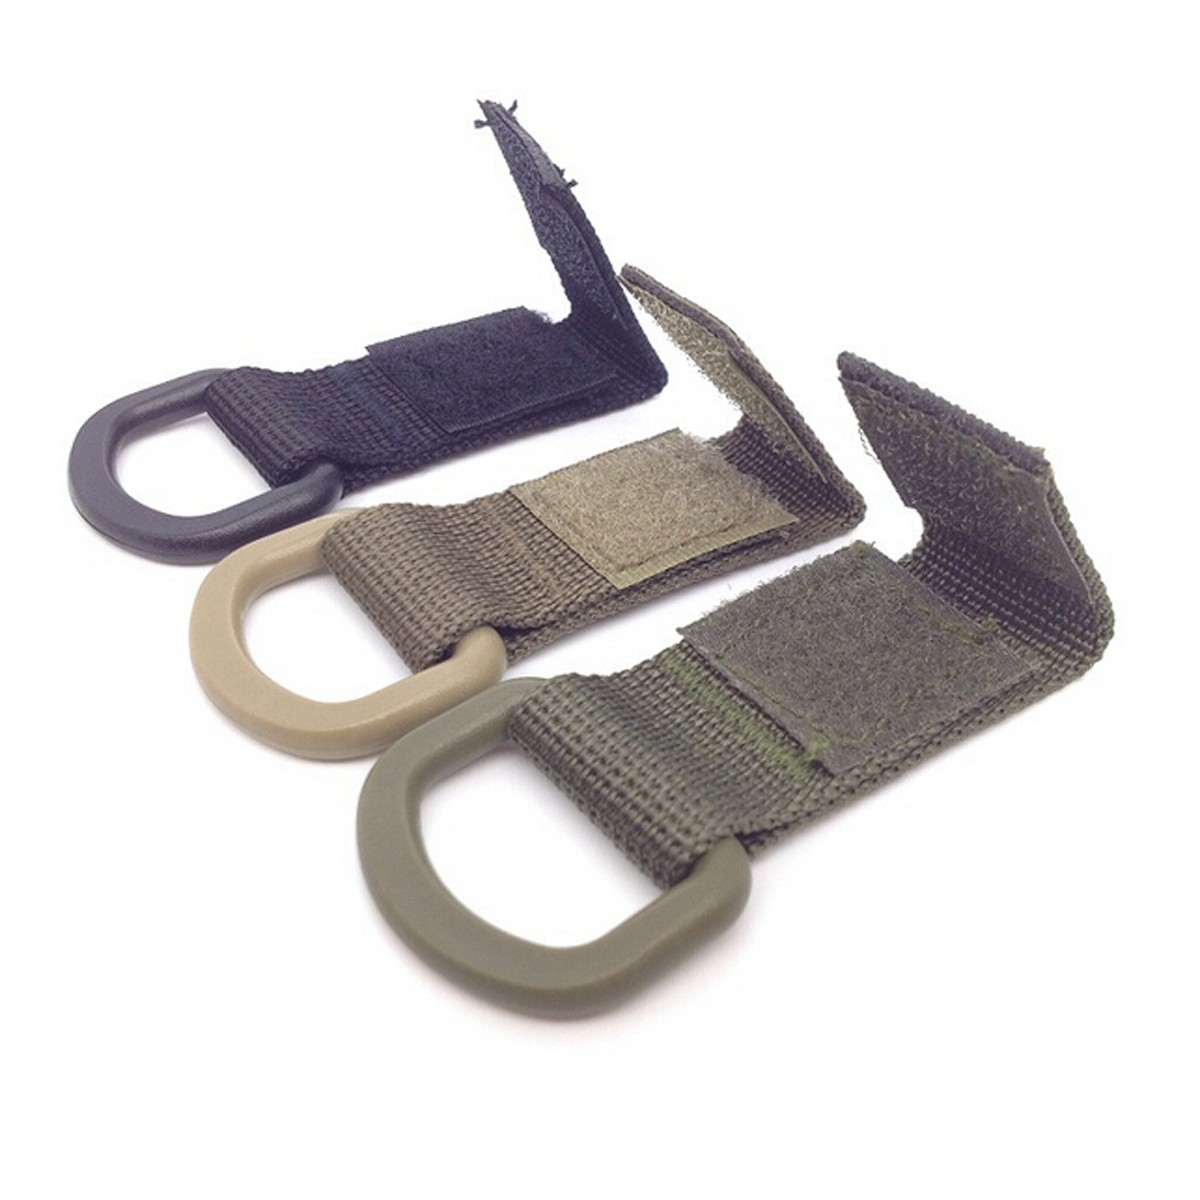 Military-Tactical-Carabiner-Nylon-Strap-Buckle-Hook-Belt-Hanging-Keychain-D-shaped-Ring-Molle-System-1028668-2